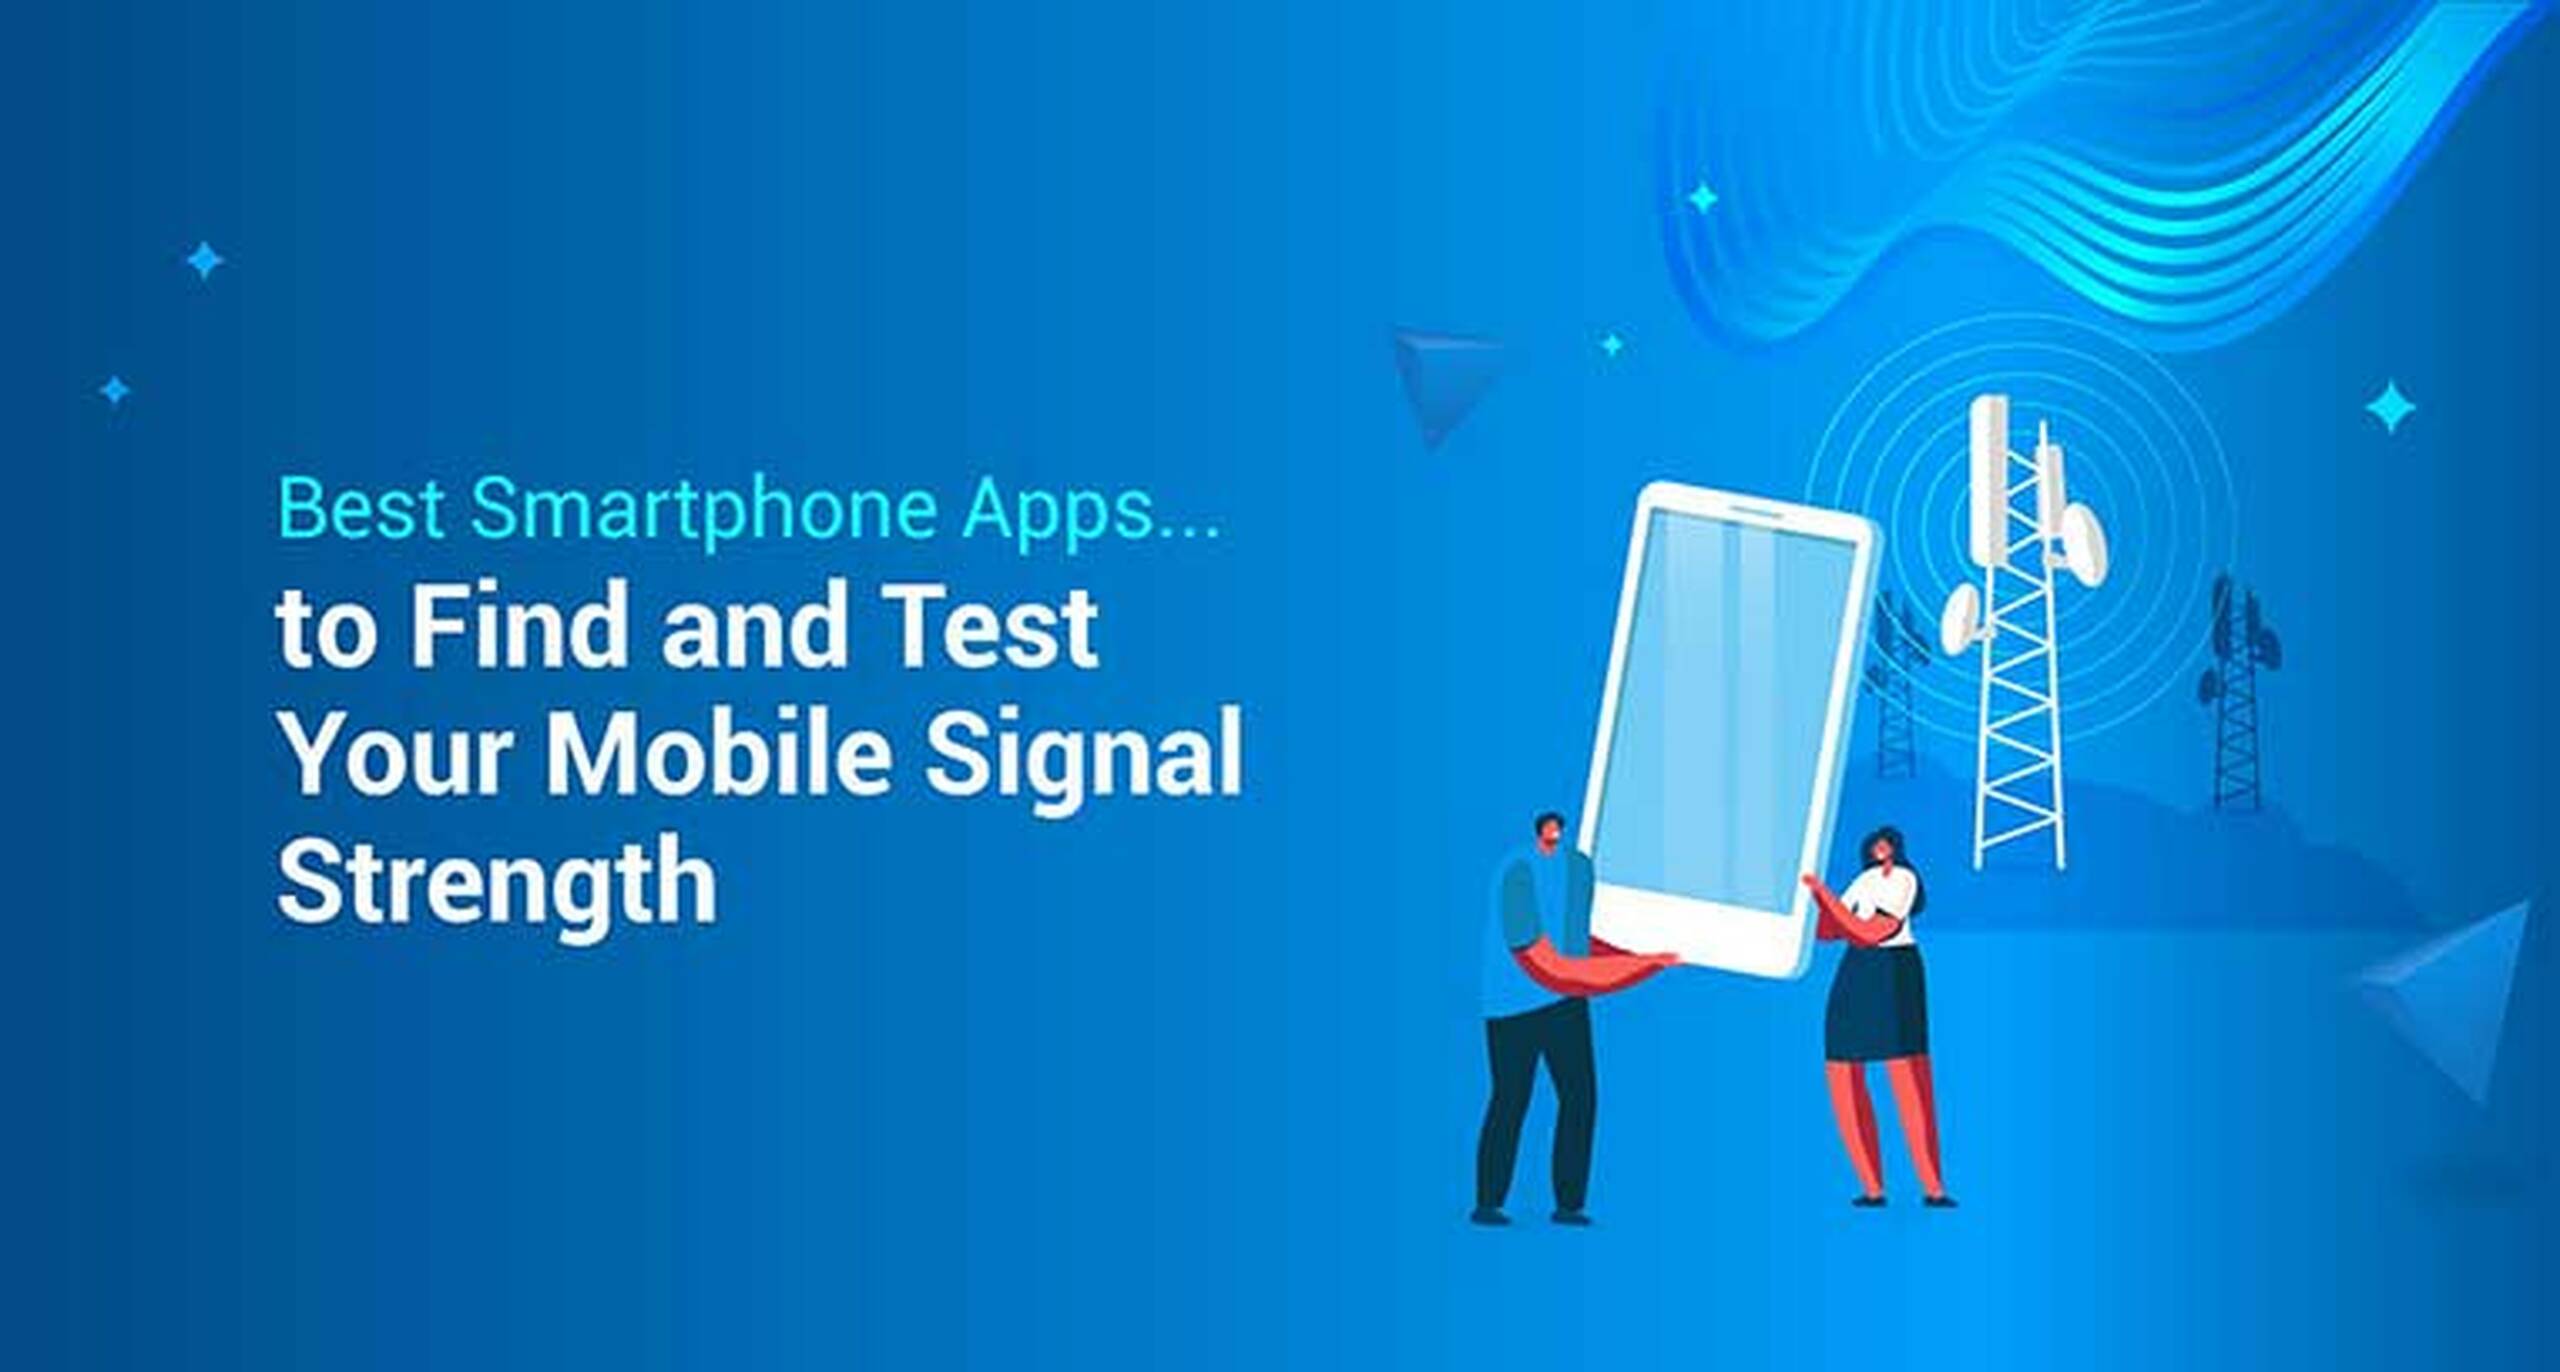 Best Smartphone Apps to Find Your Mobile Signal Strength